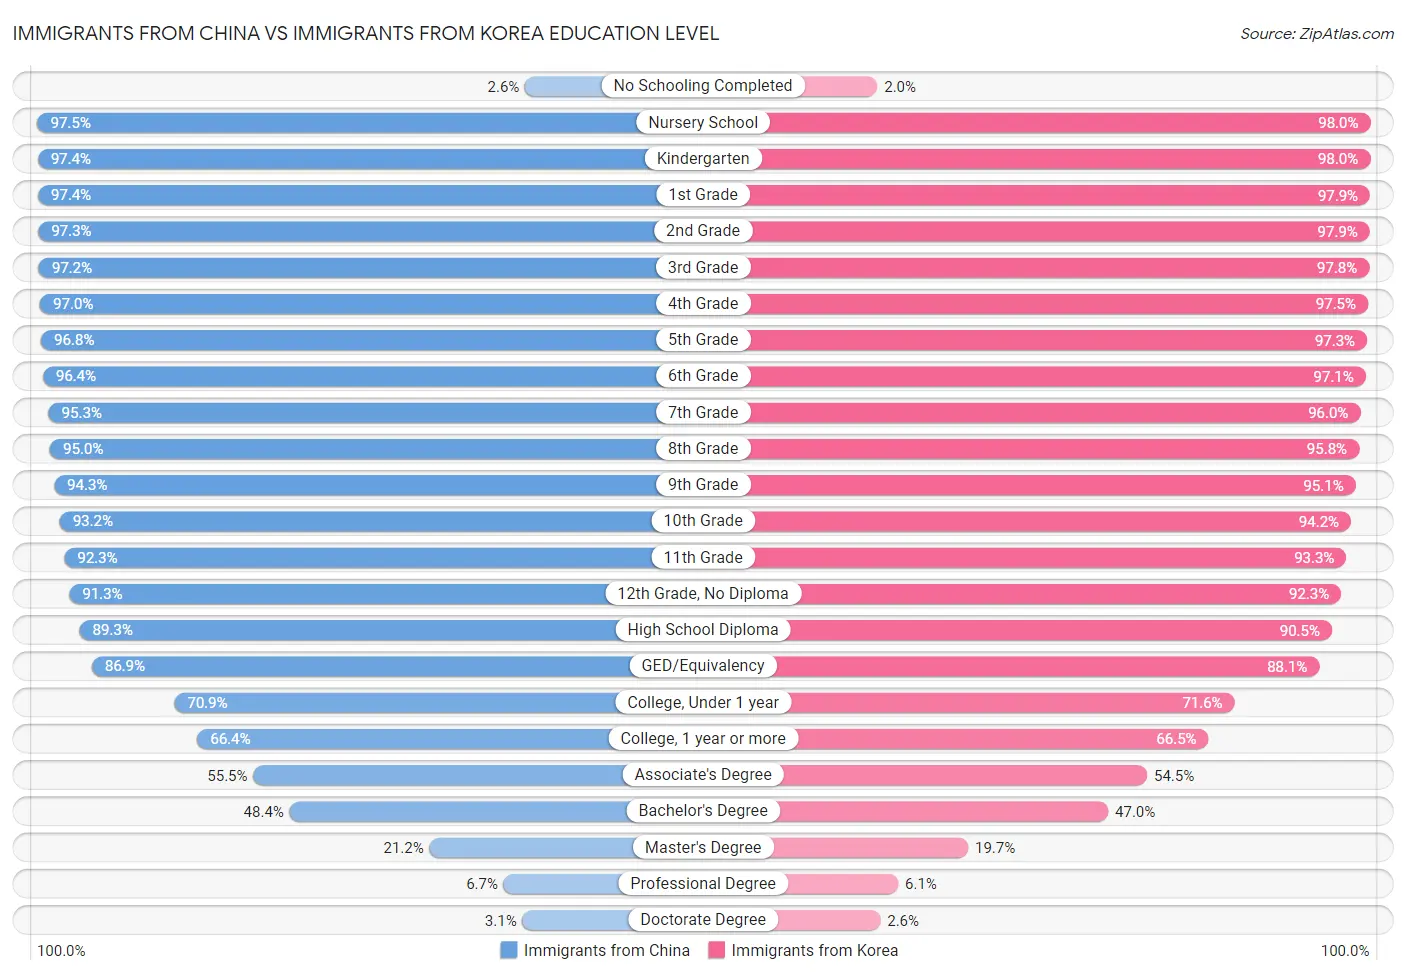 Immigrants from China vs Immigrants from Korea Education Level